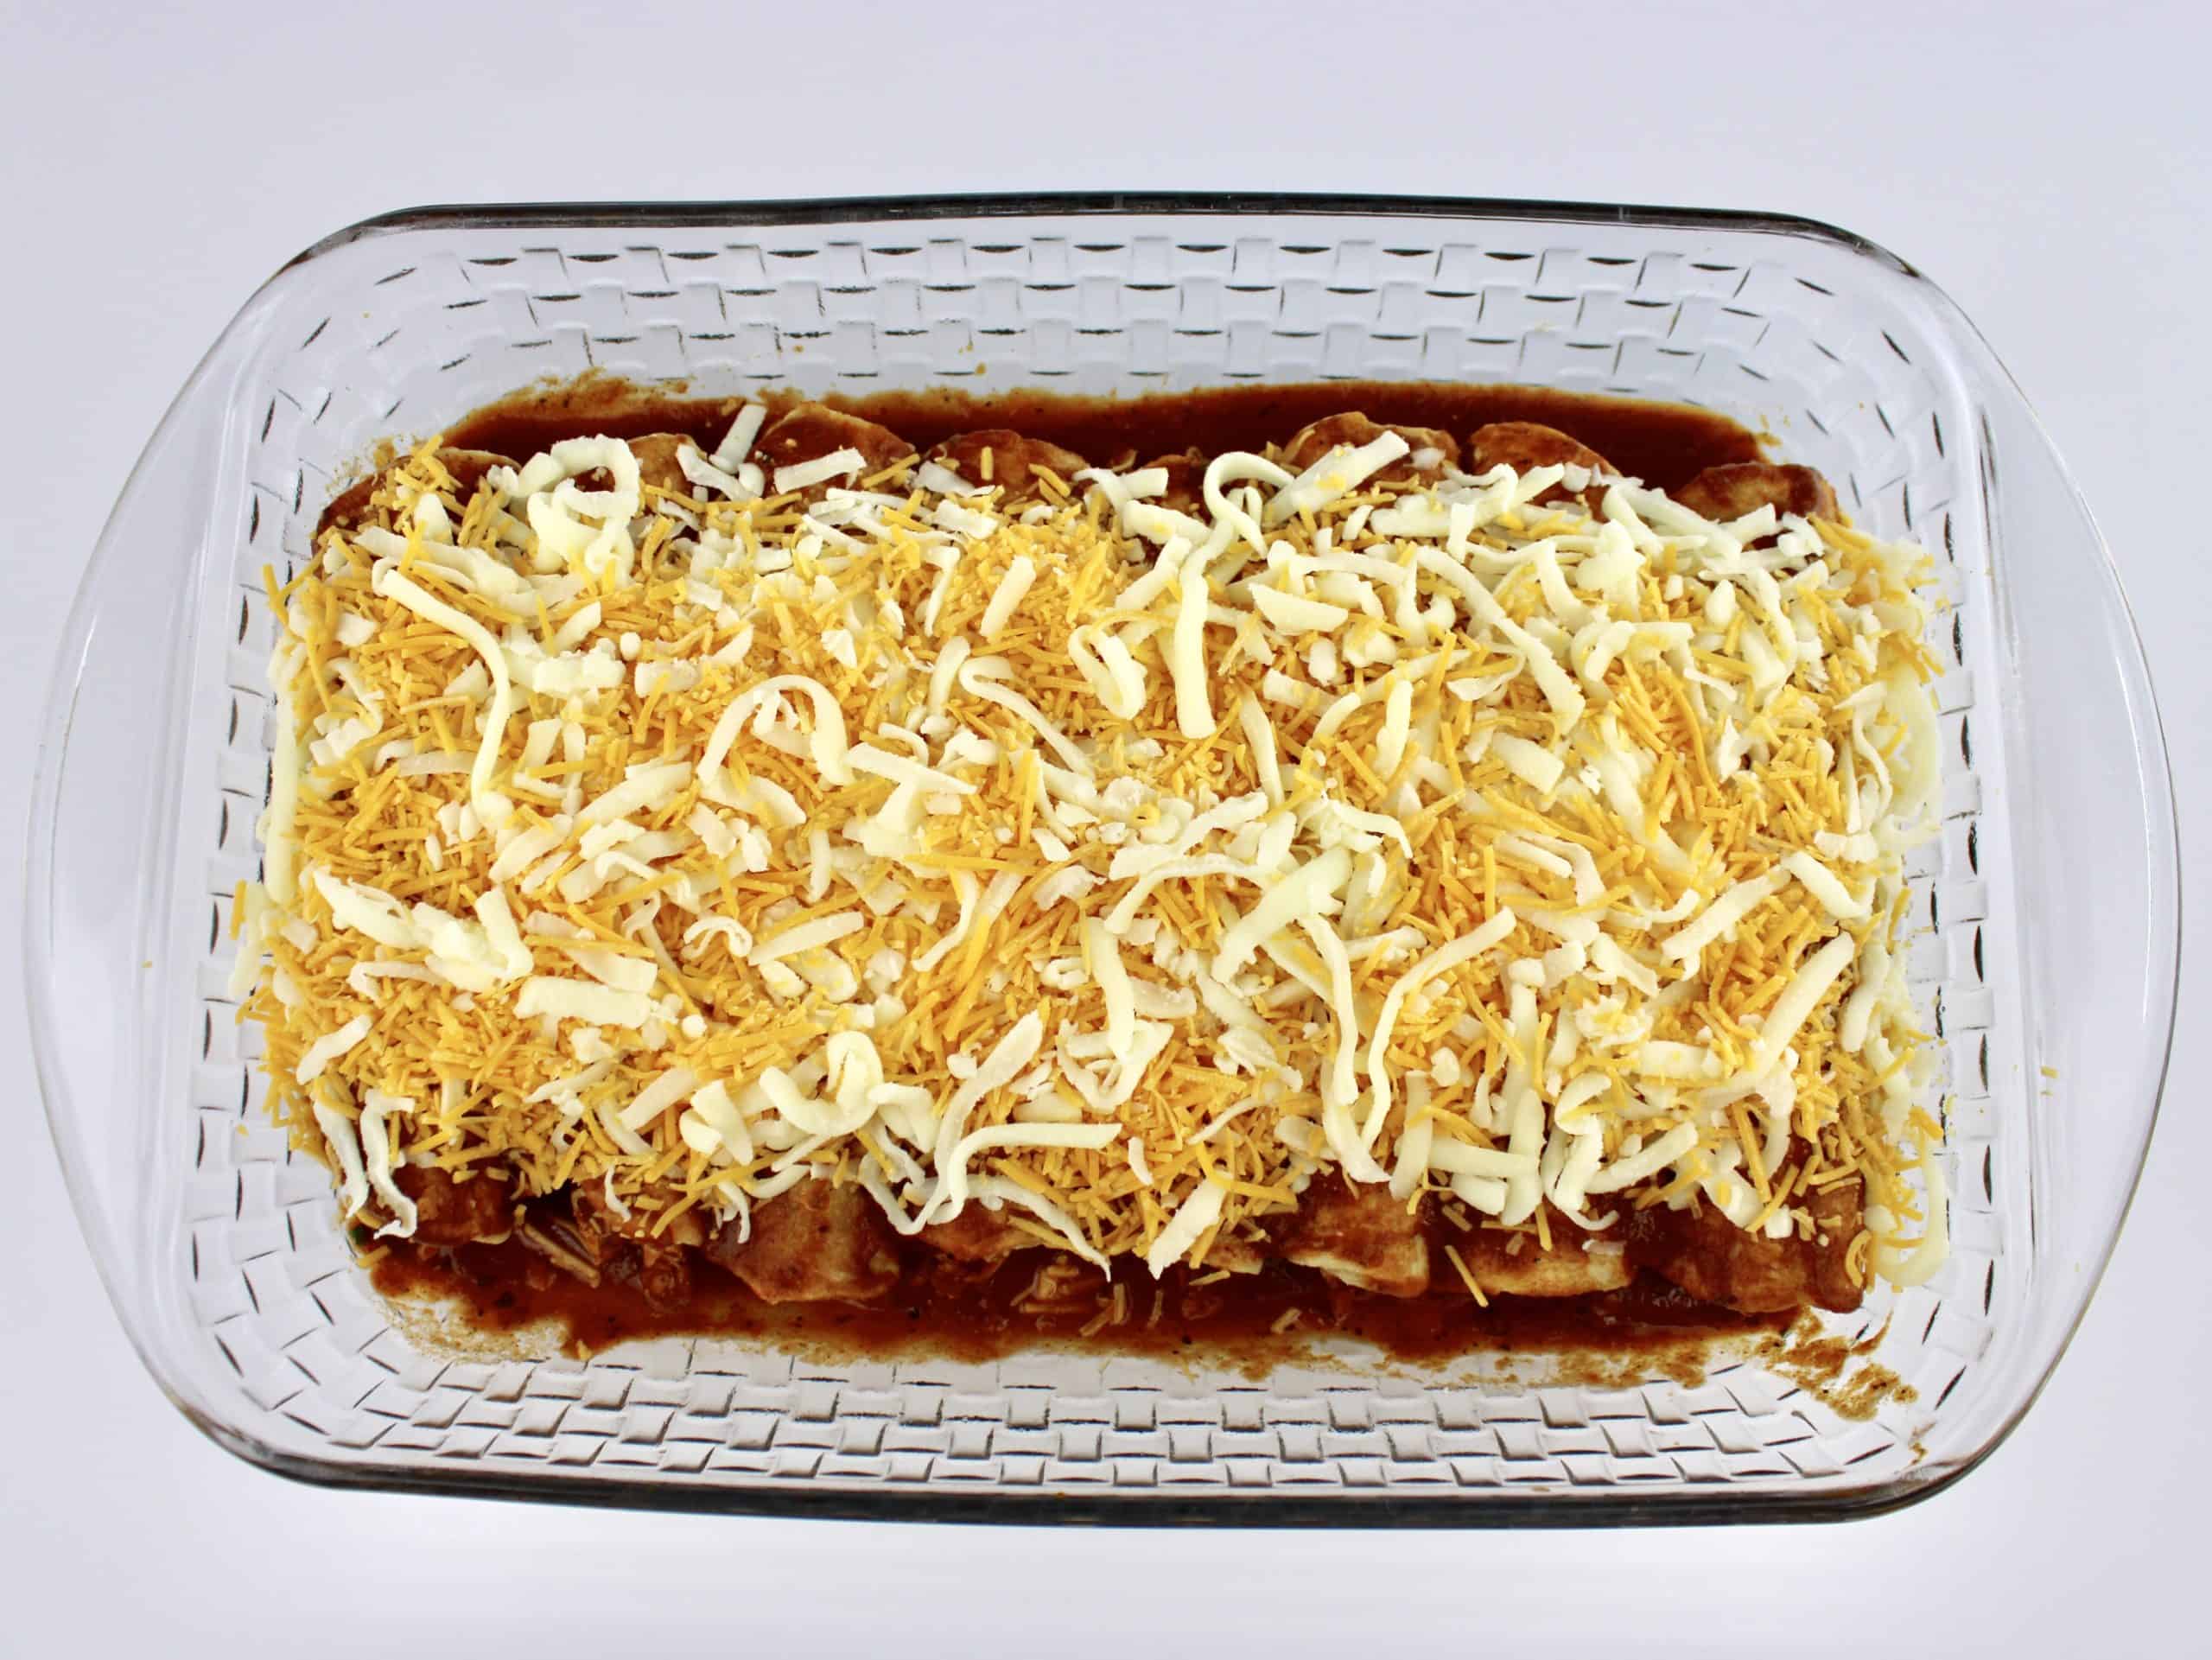 8 Chicken Enchiladas with cheese on top in glass baking dish unbaked